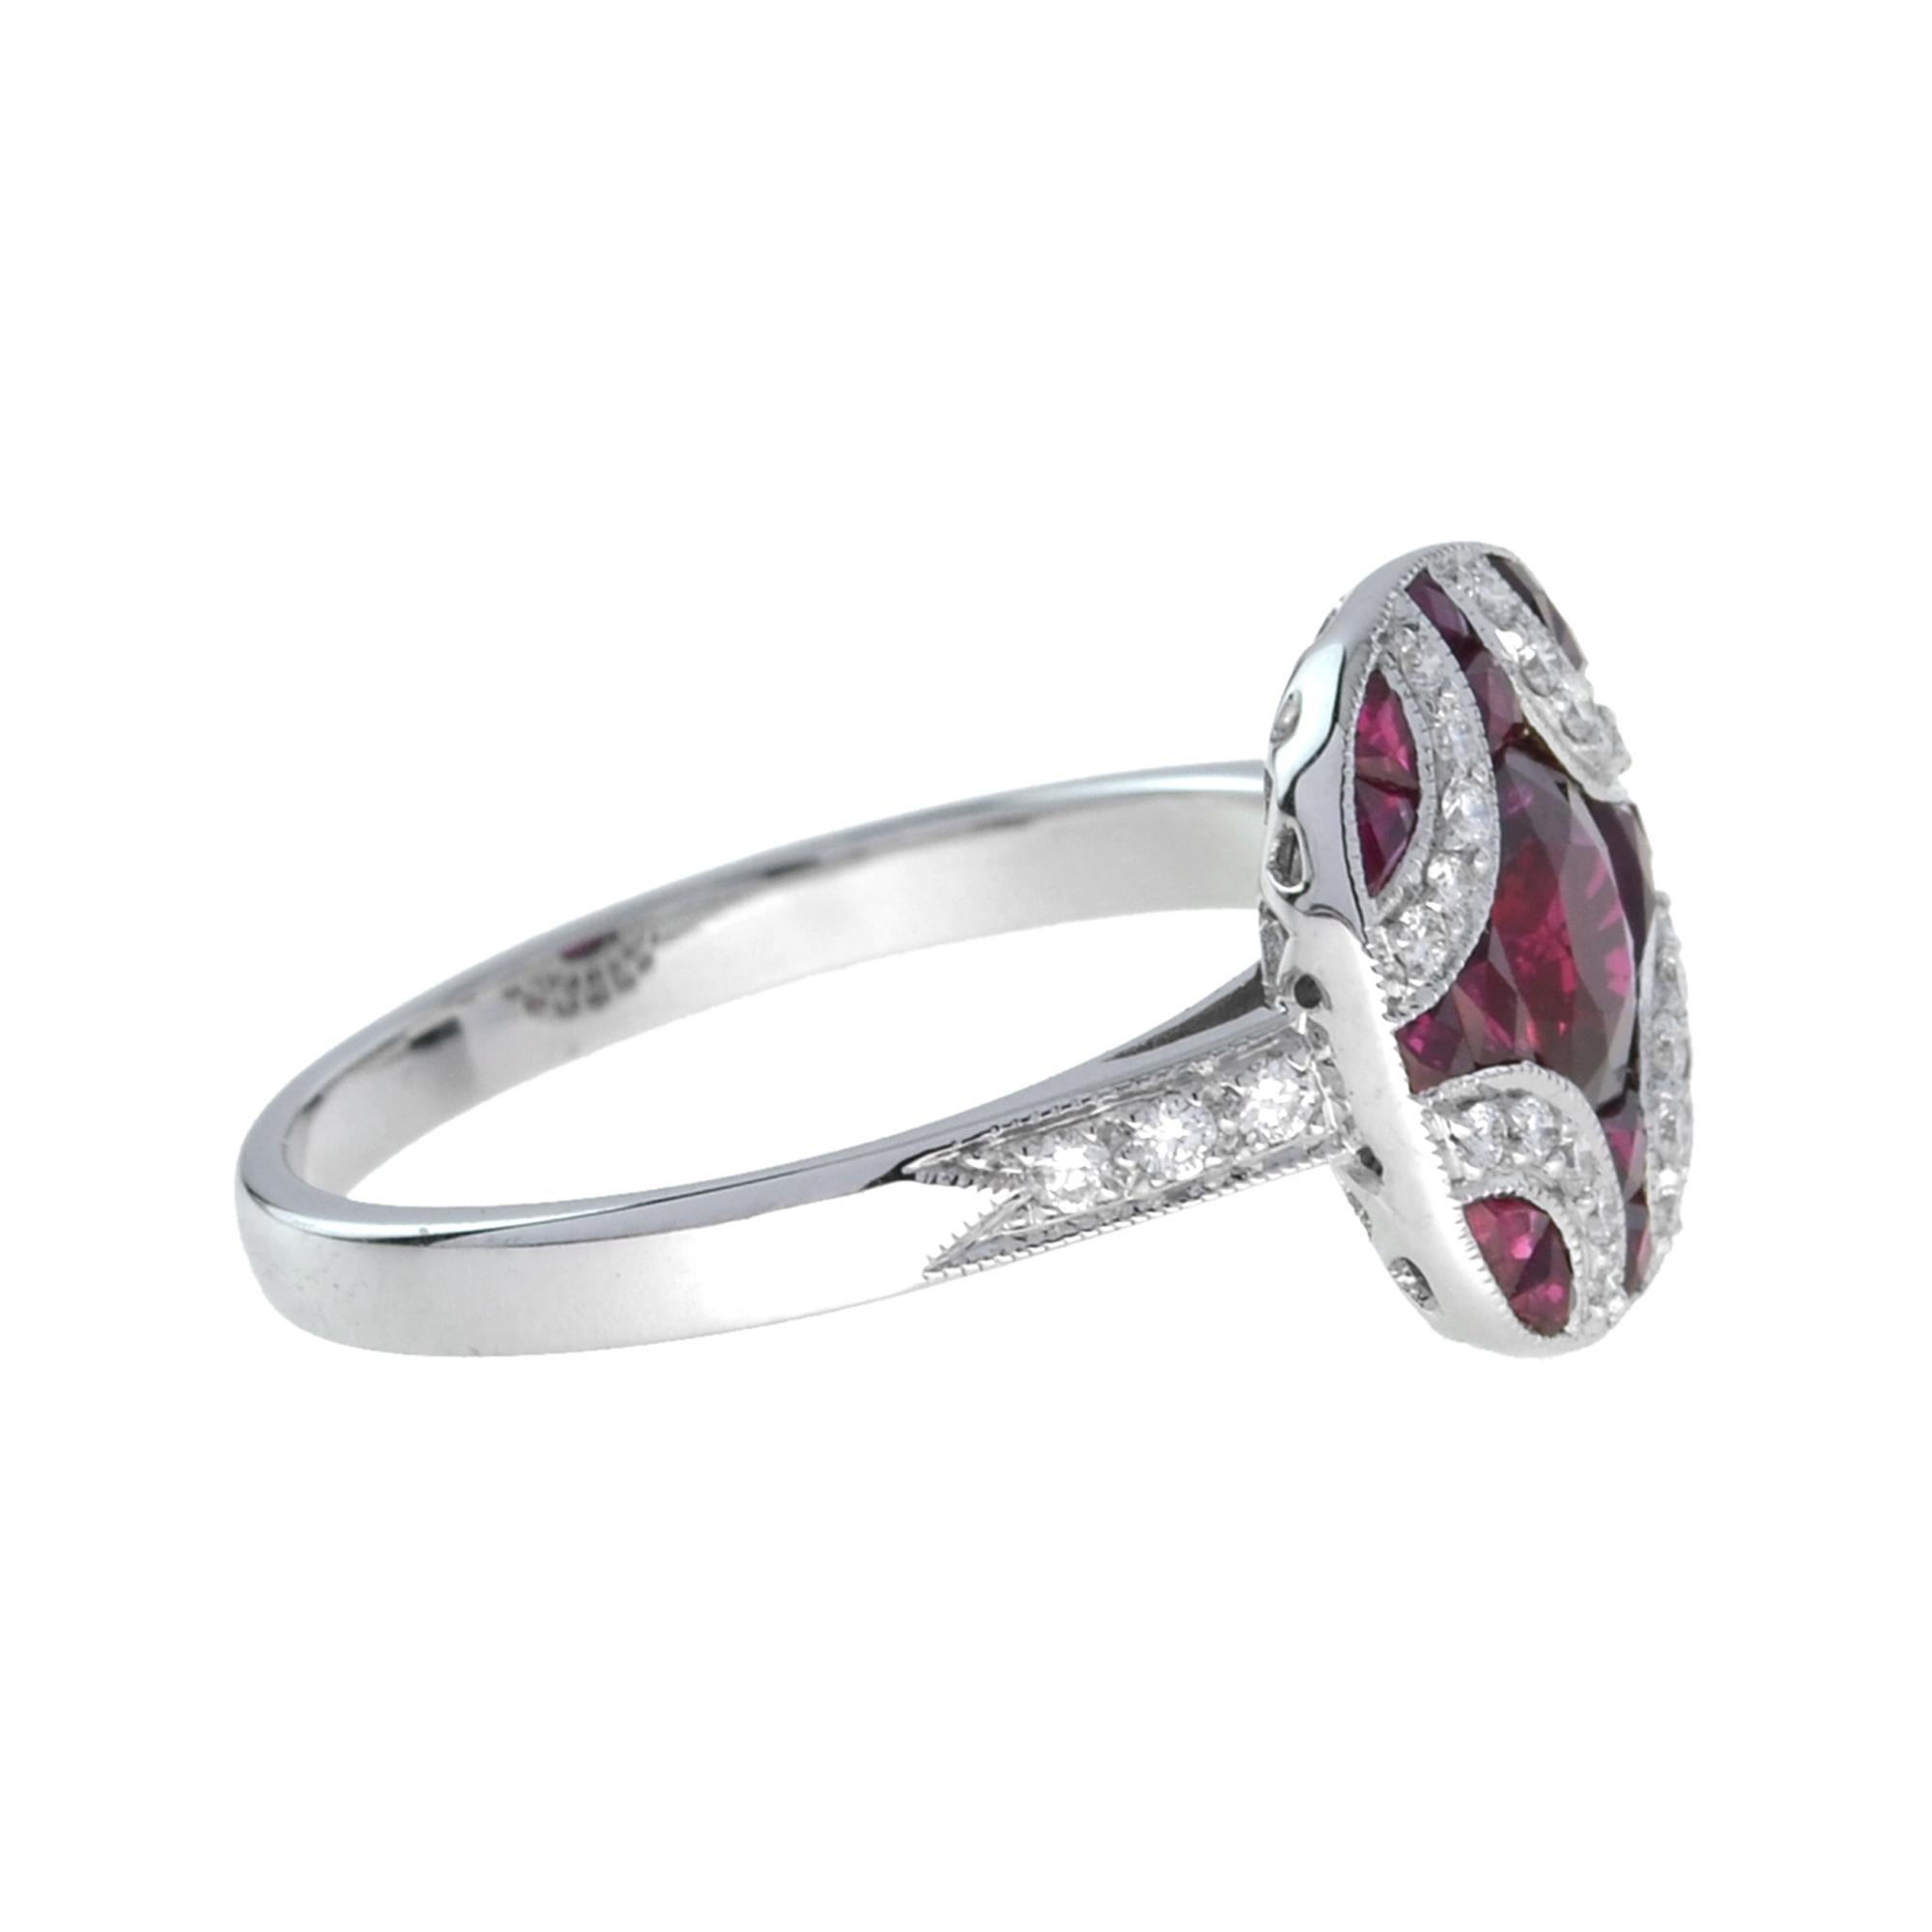 For Sale:  Art Deco Style Oval Ruby with Diamond Cluster Ring in 18K White Gold 7